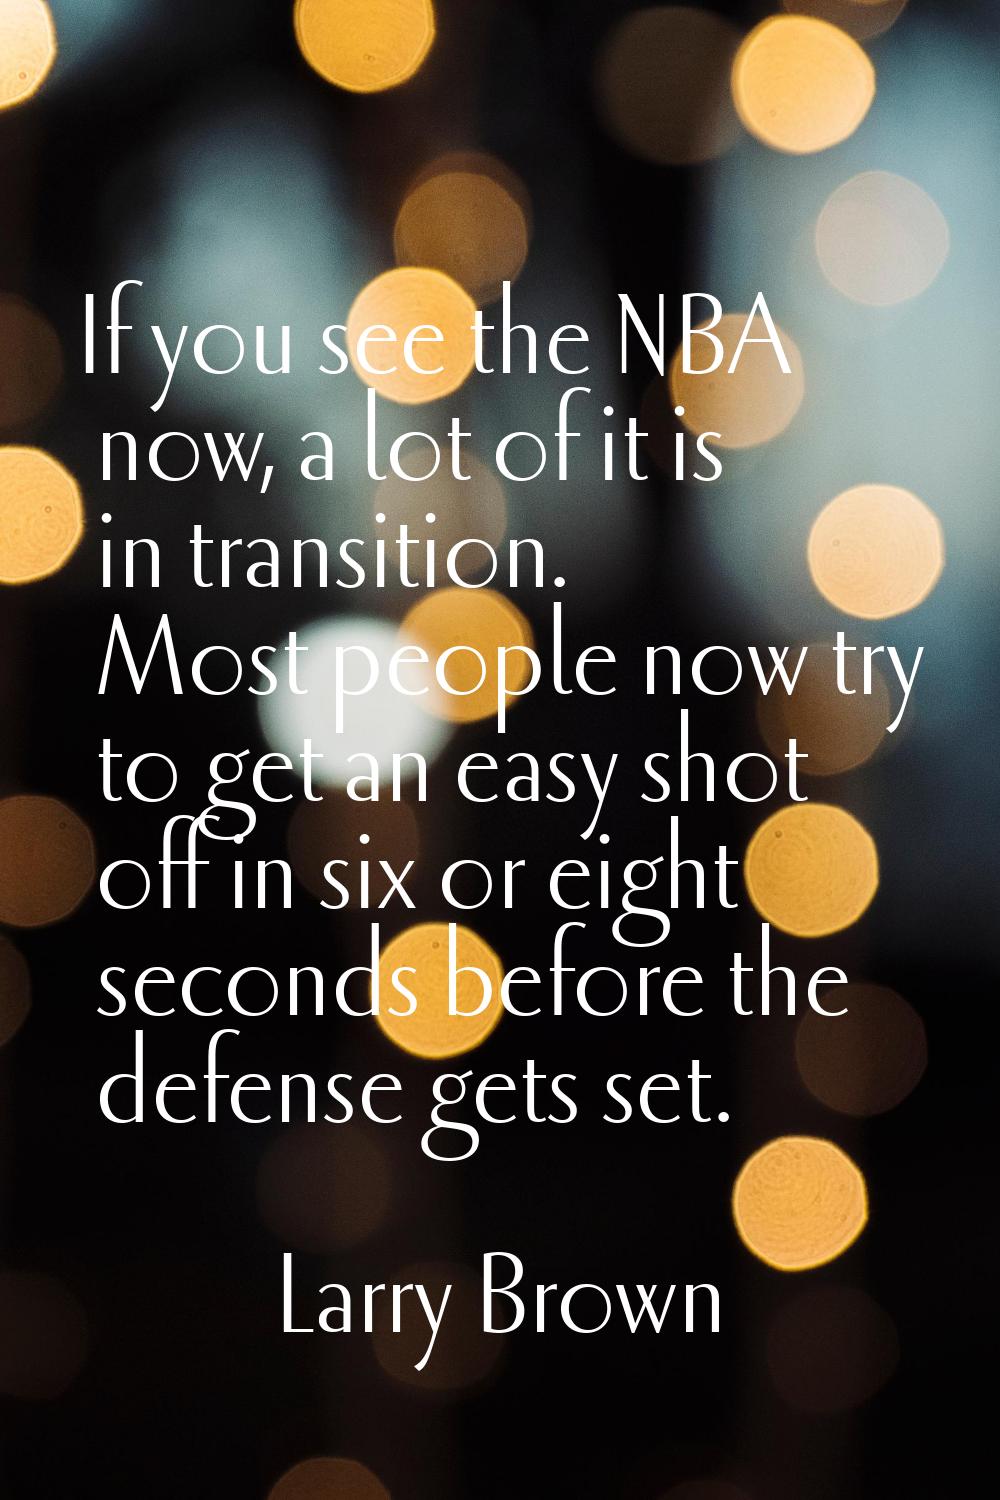 If you see the NBA now, a lot of it is in transition. Most people now try to get an easy shot off i